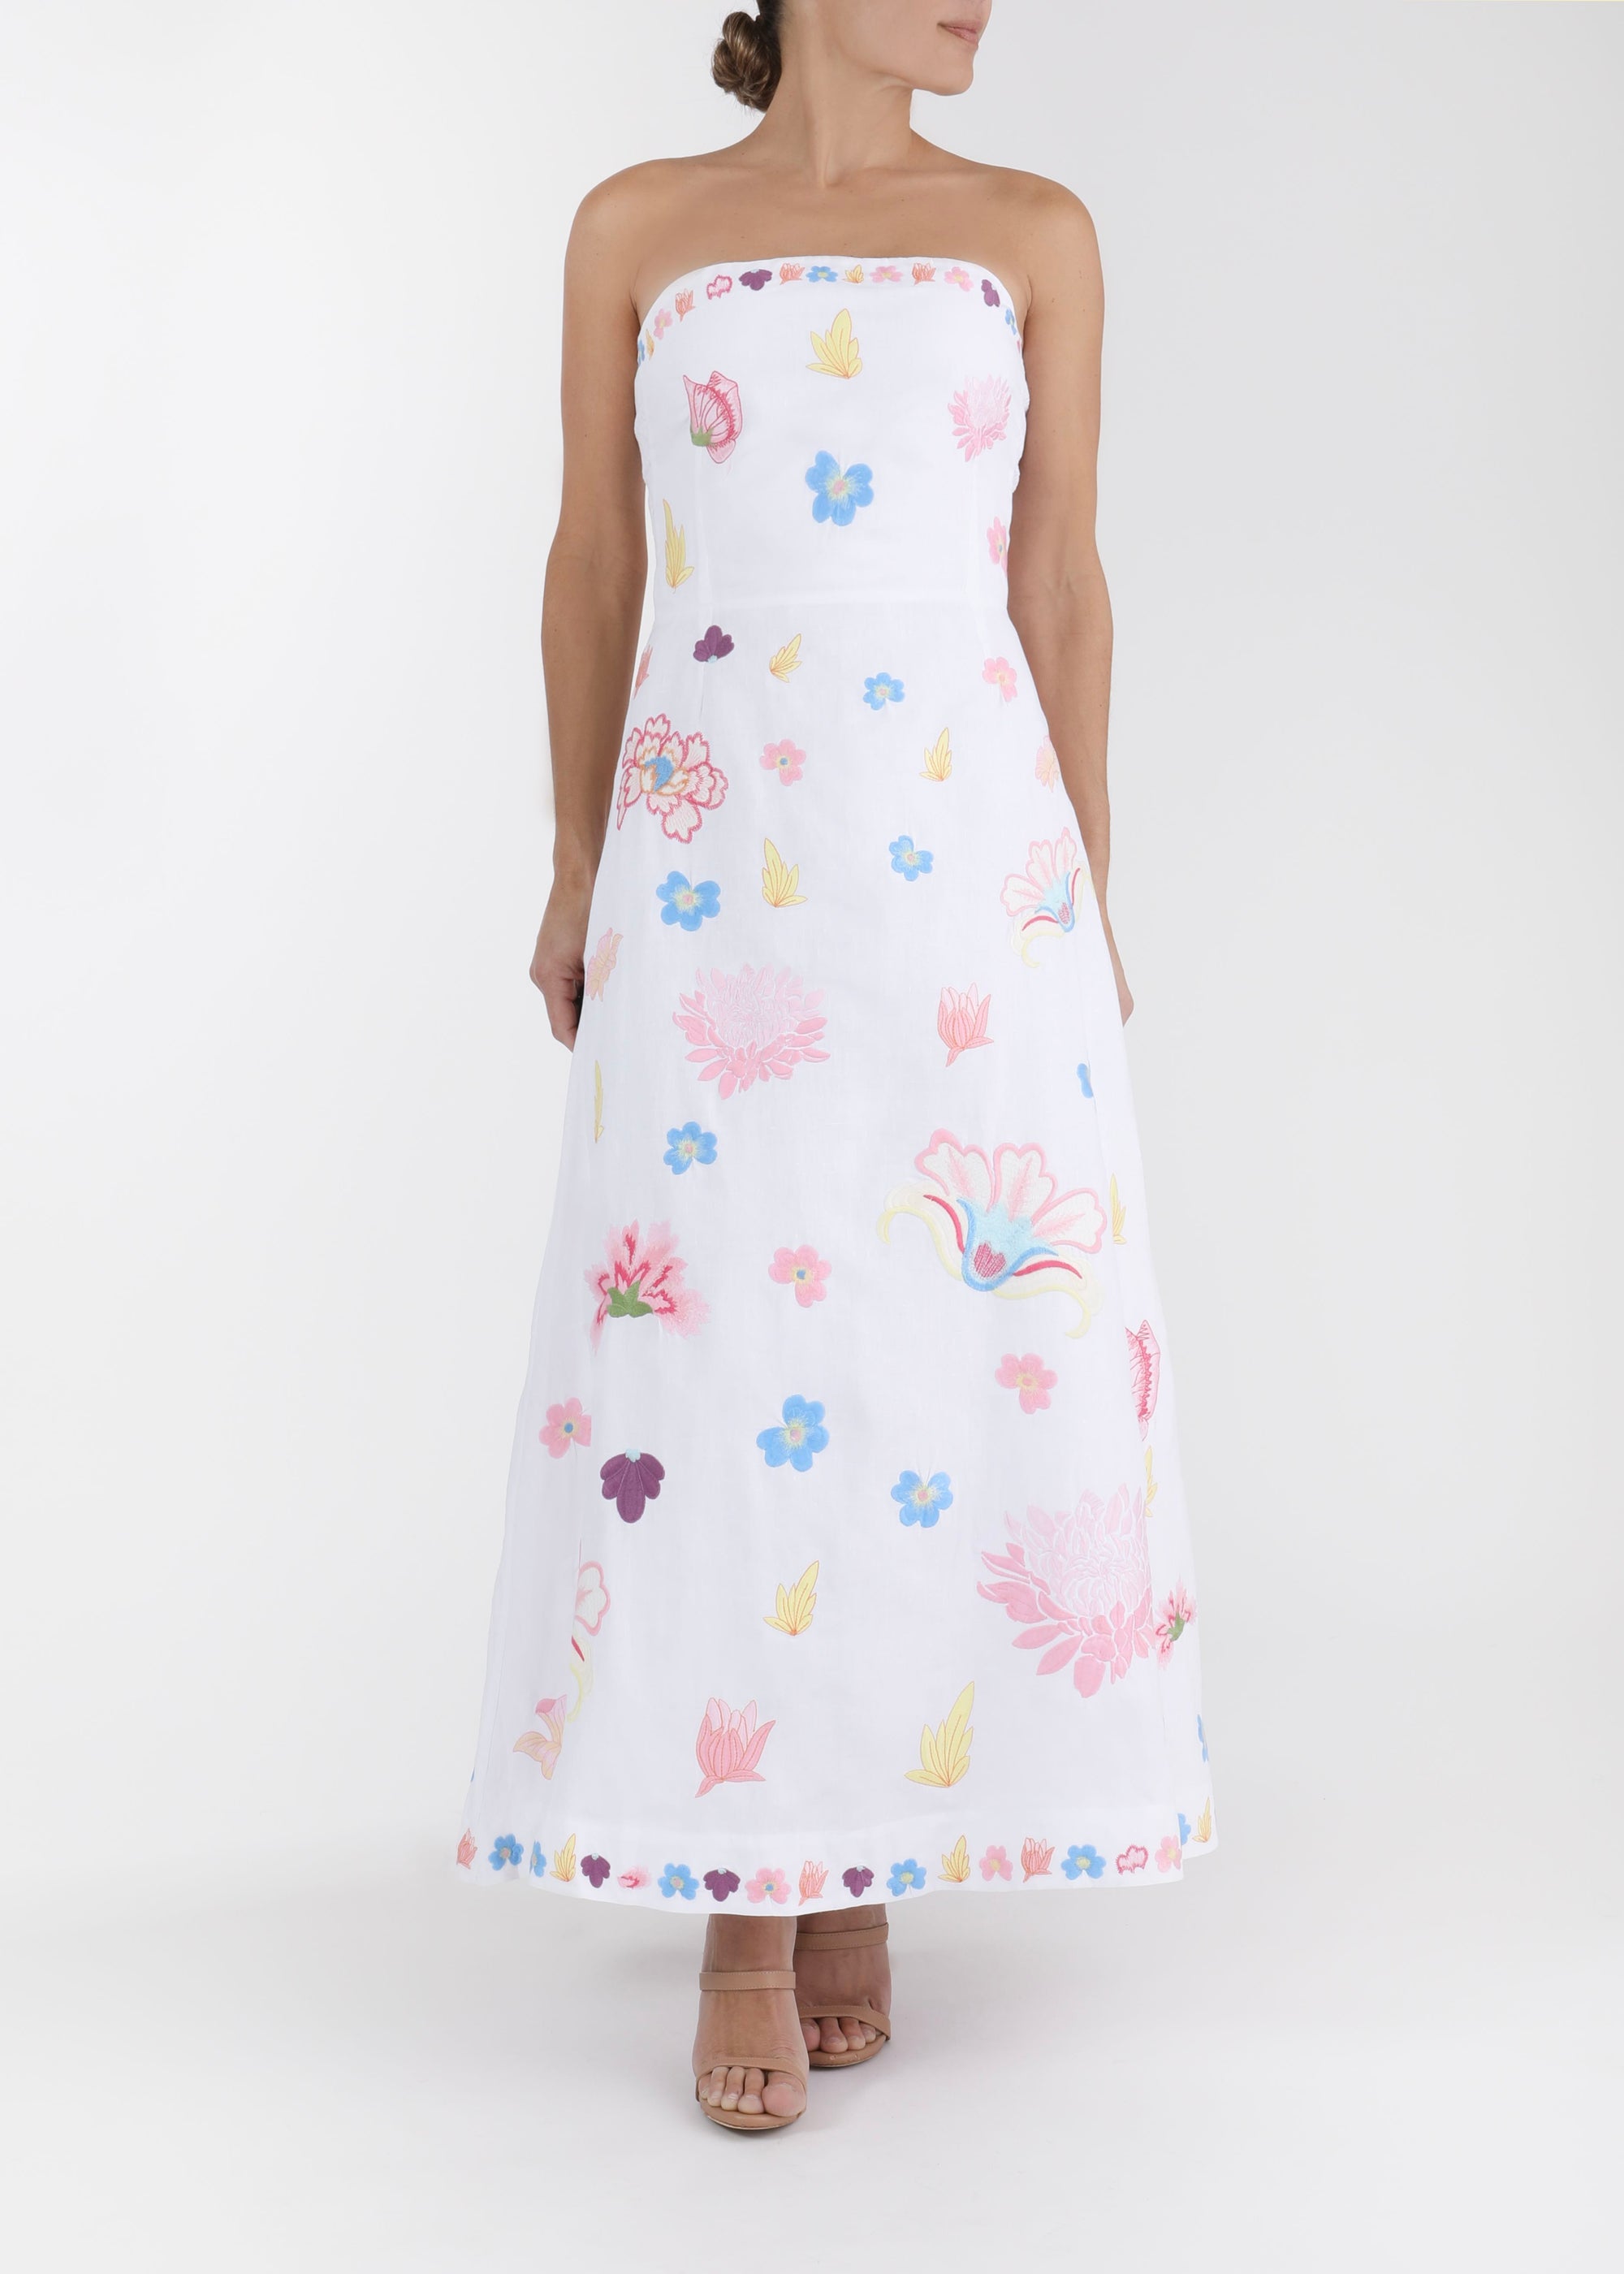 Fanm Mon and Over the Moon Maddie Strapless Floral Embroidered Dress